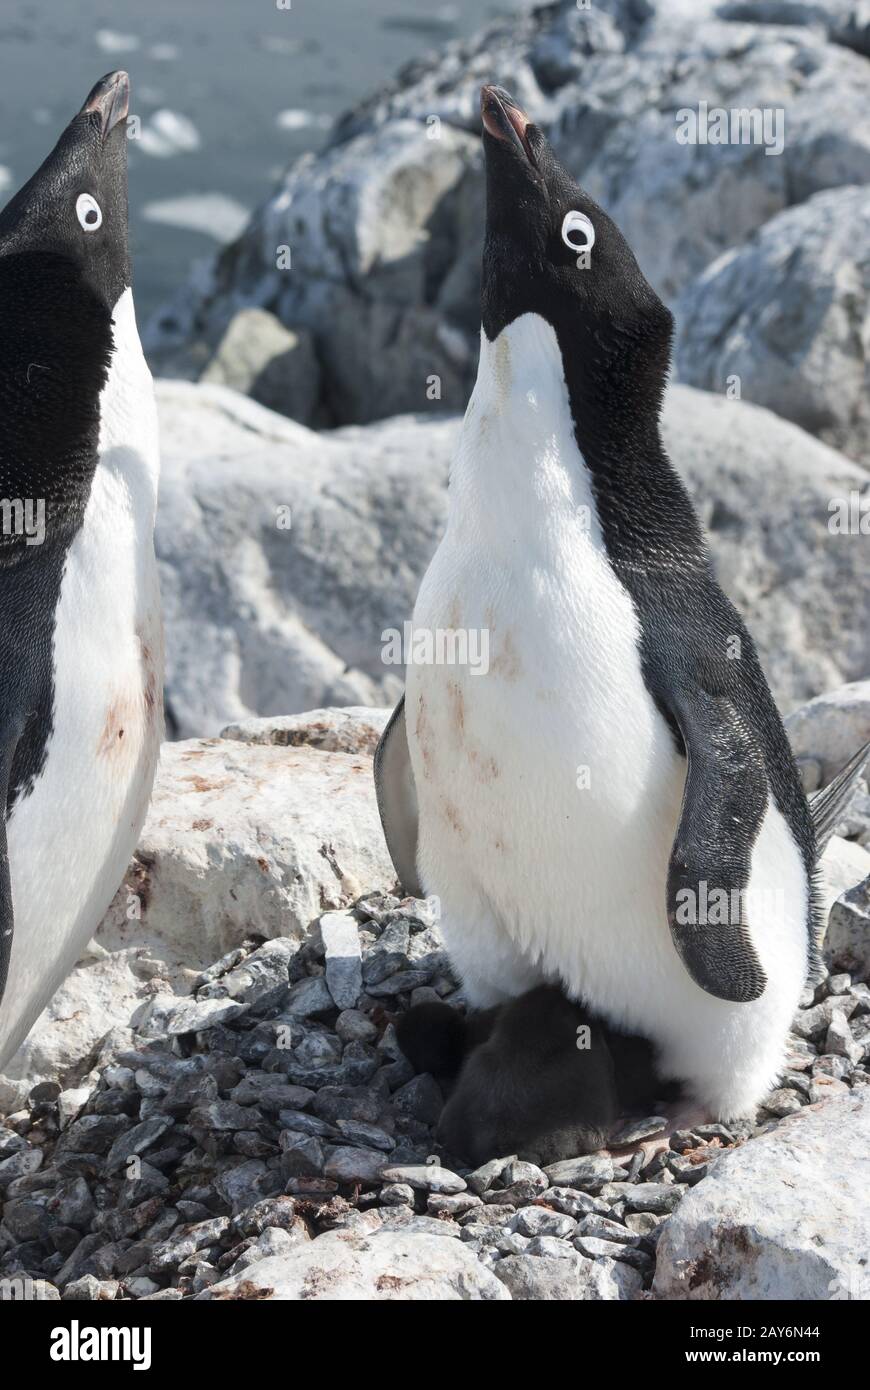 female Adelie penguin near the nest that welcomes the male approached to the nest Stock Photo